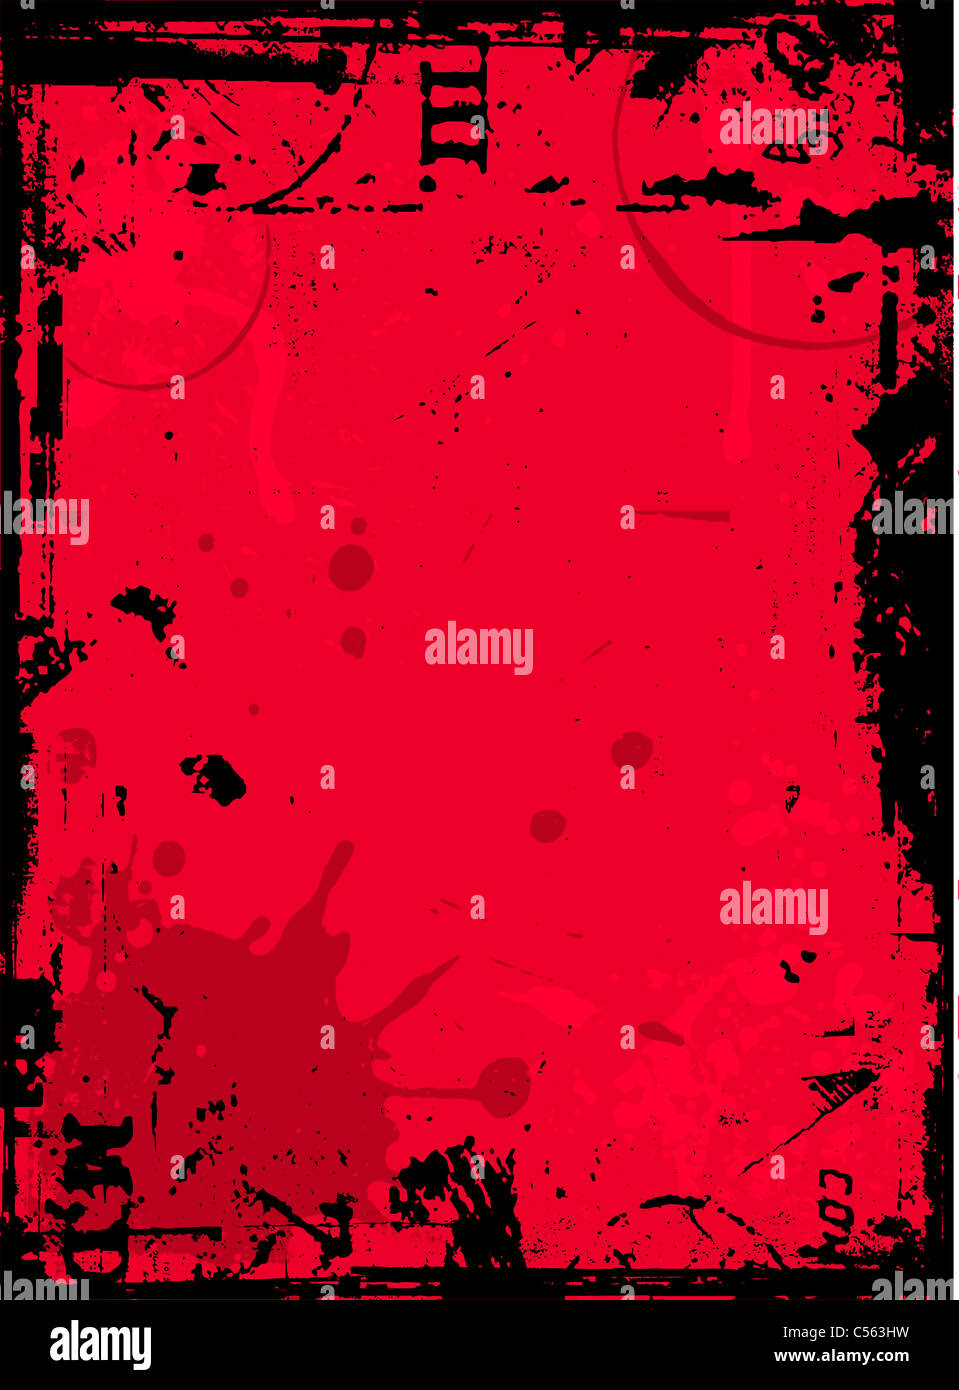 Grunge background with splats and drips Stock Photo